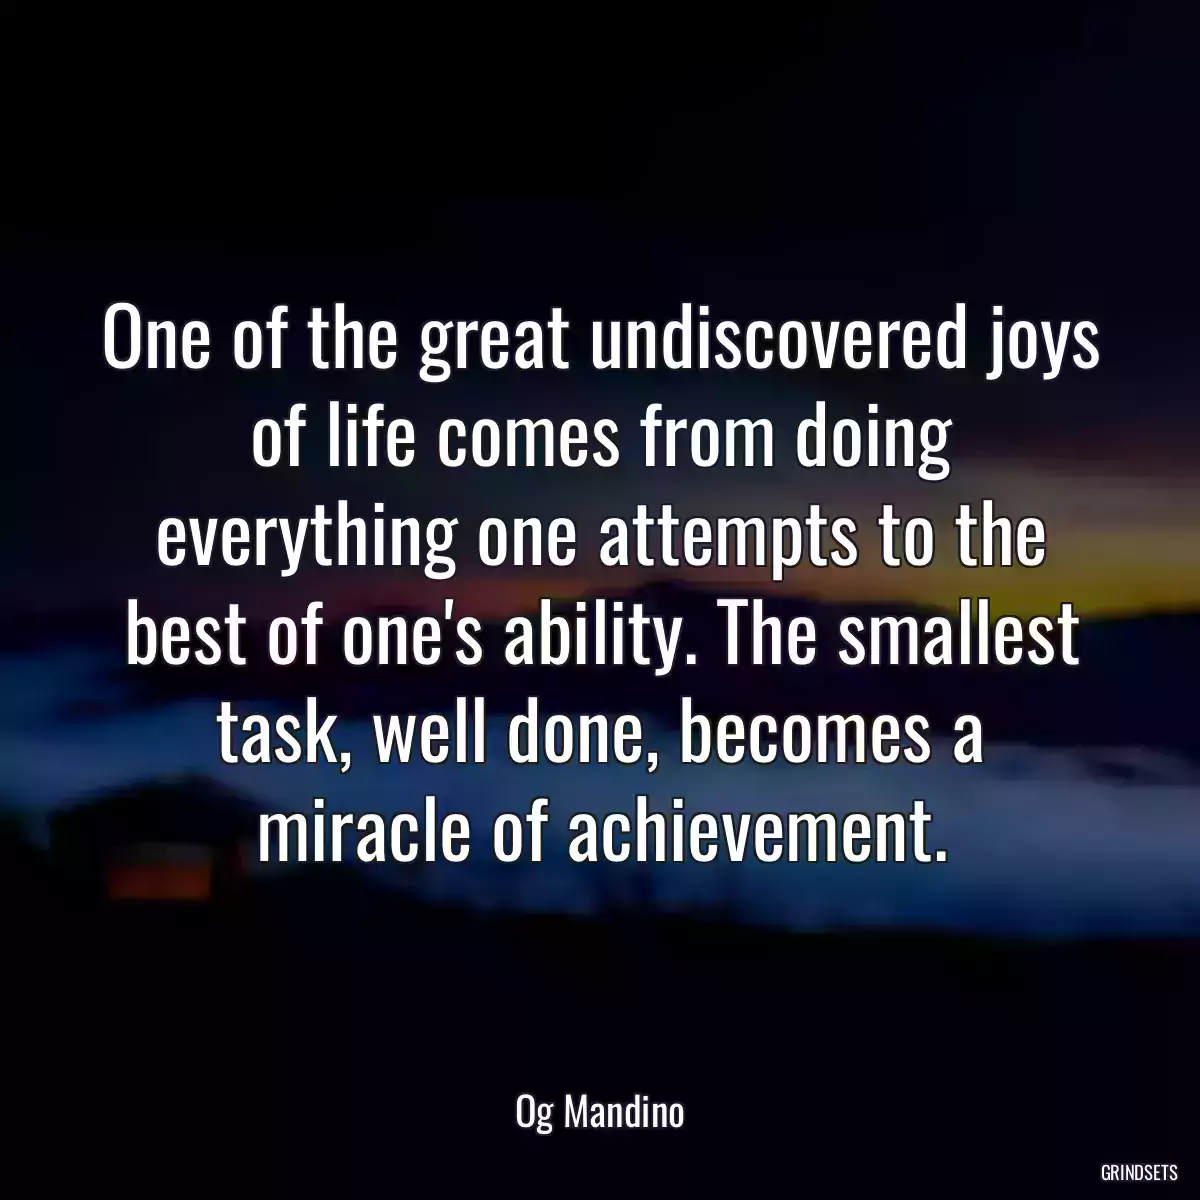 One of the great undiscovered joys of life comes from doing everything one attempts to the best of one\'s ability. The smallest task, well done, becomes a miracle of achievement.